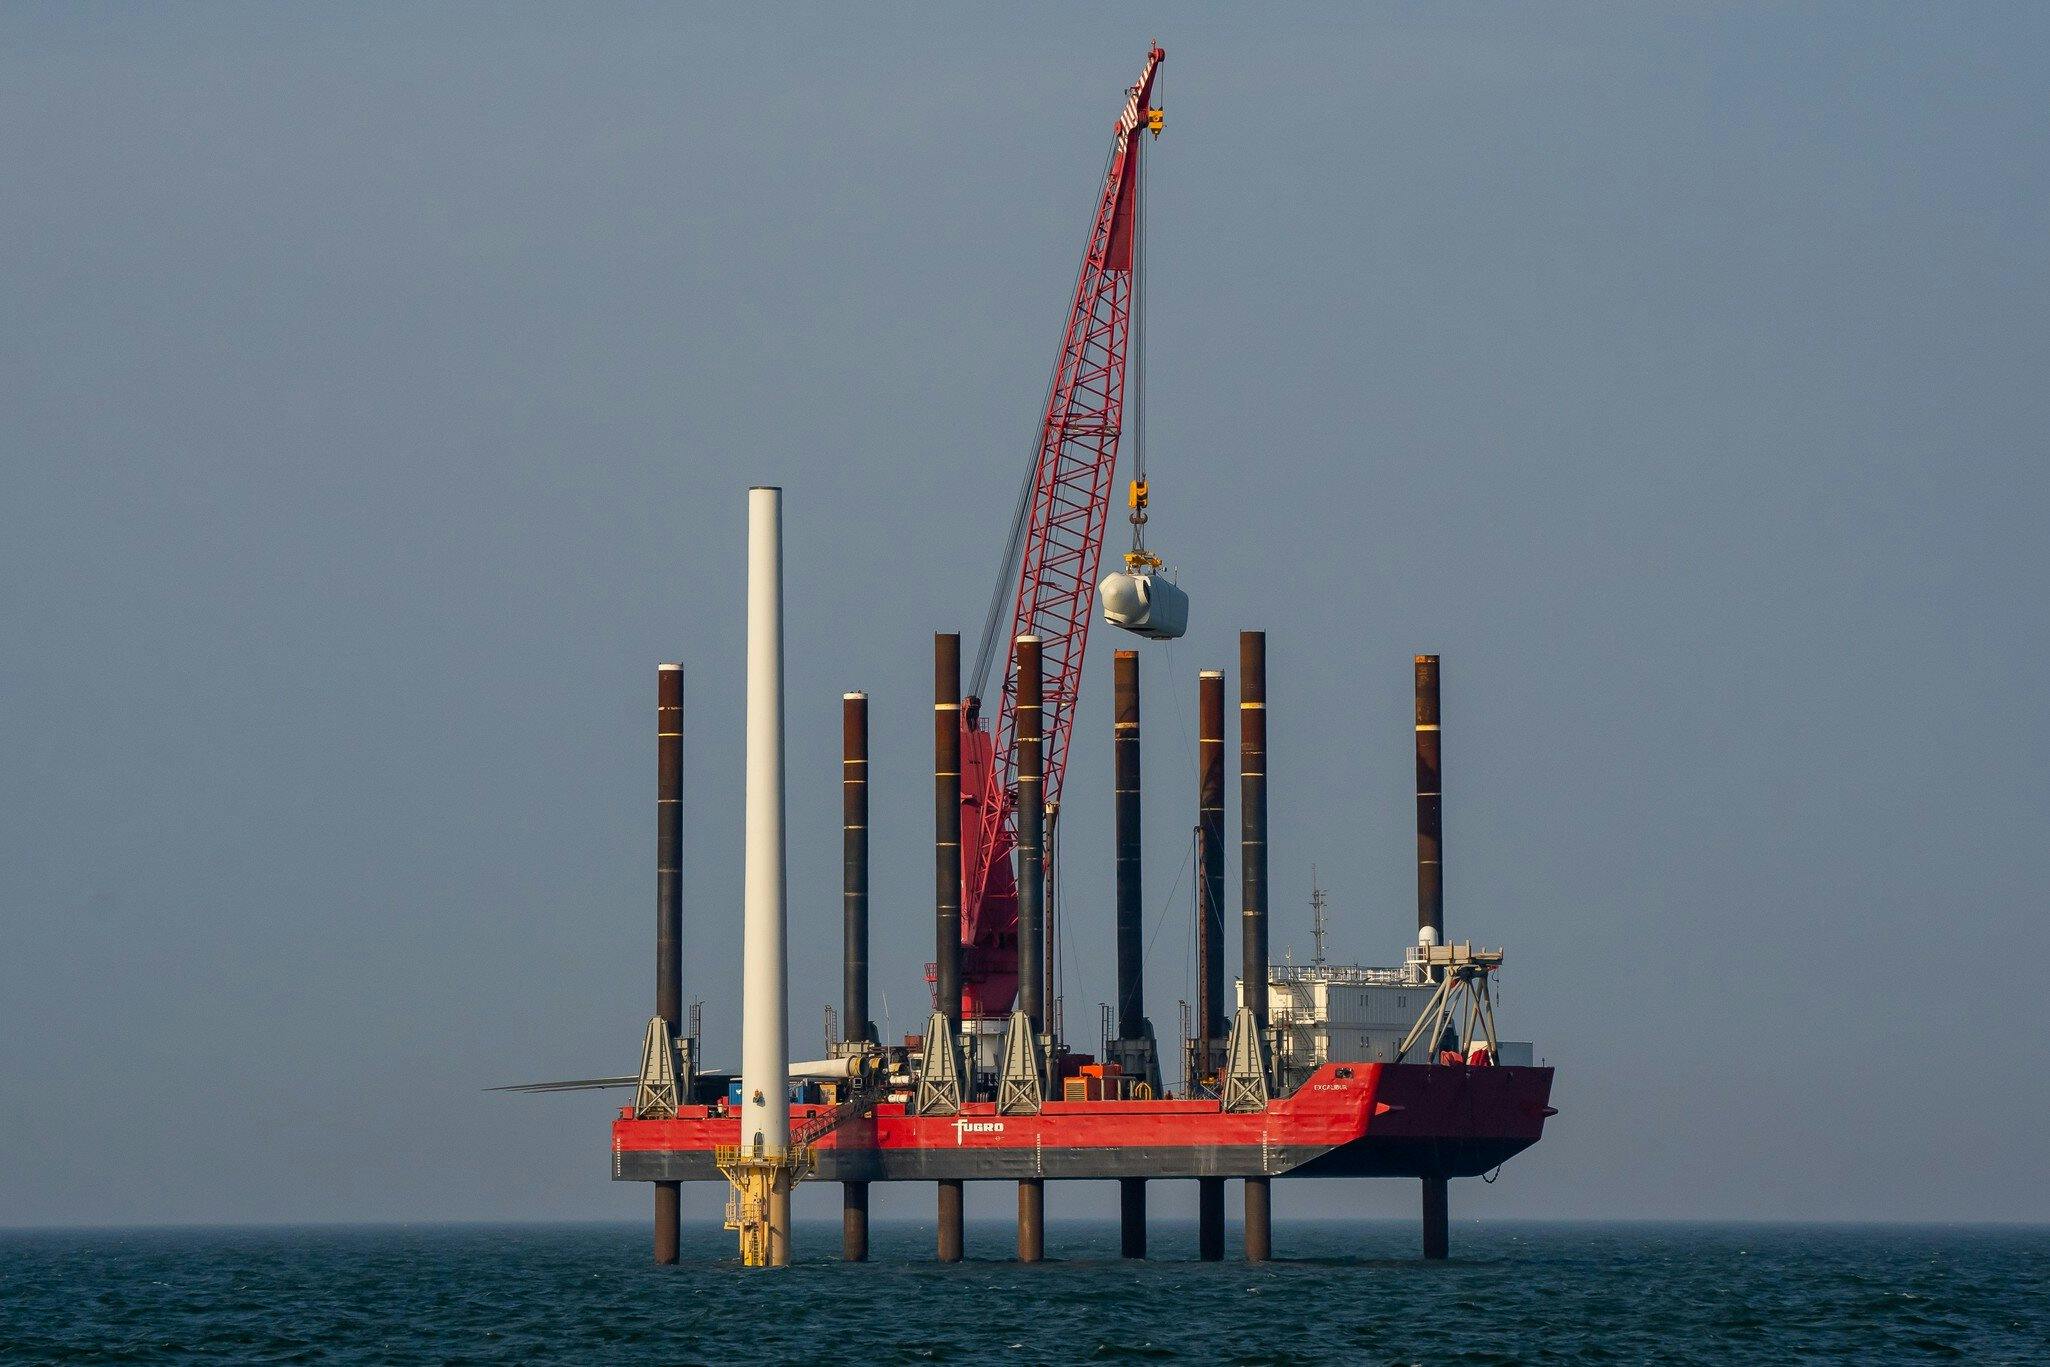 Blyth decommissioning project